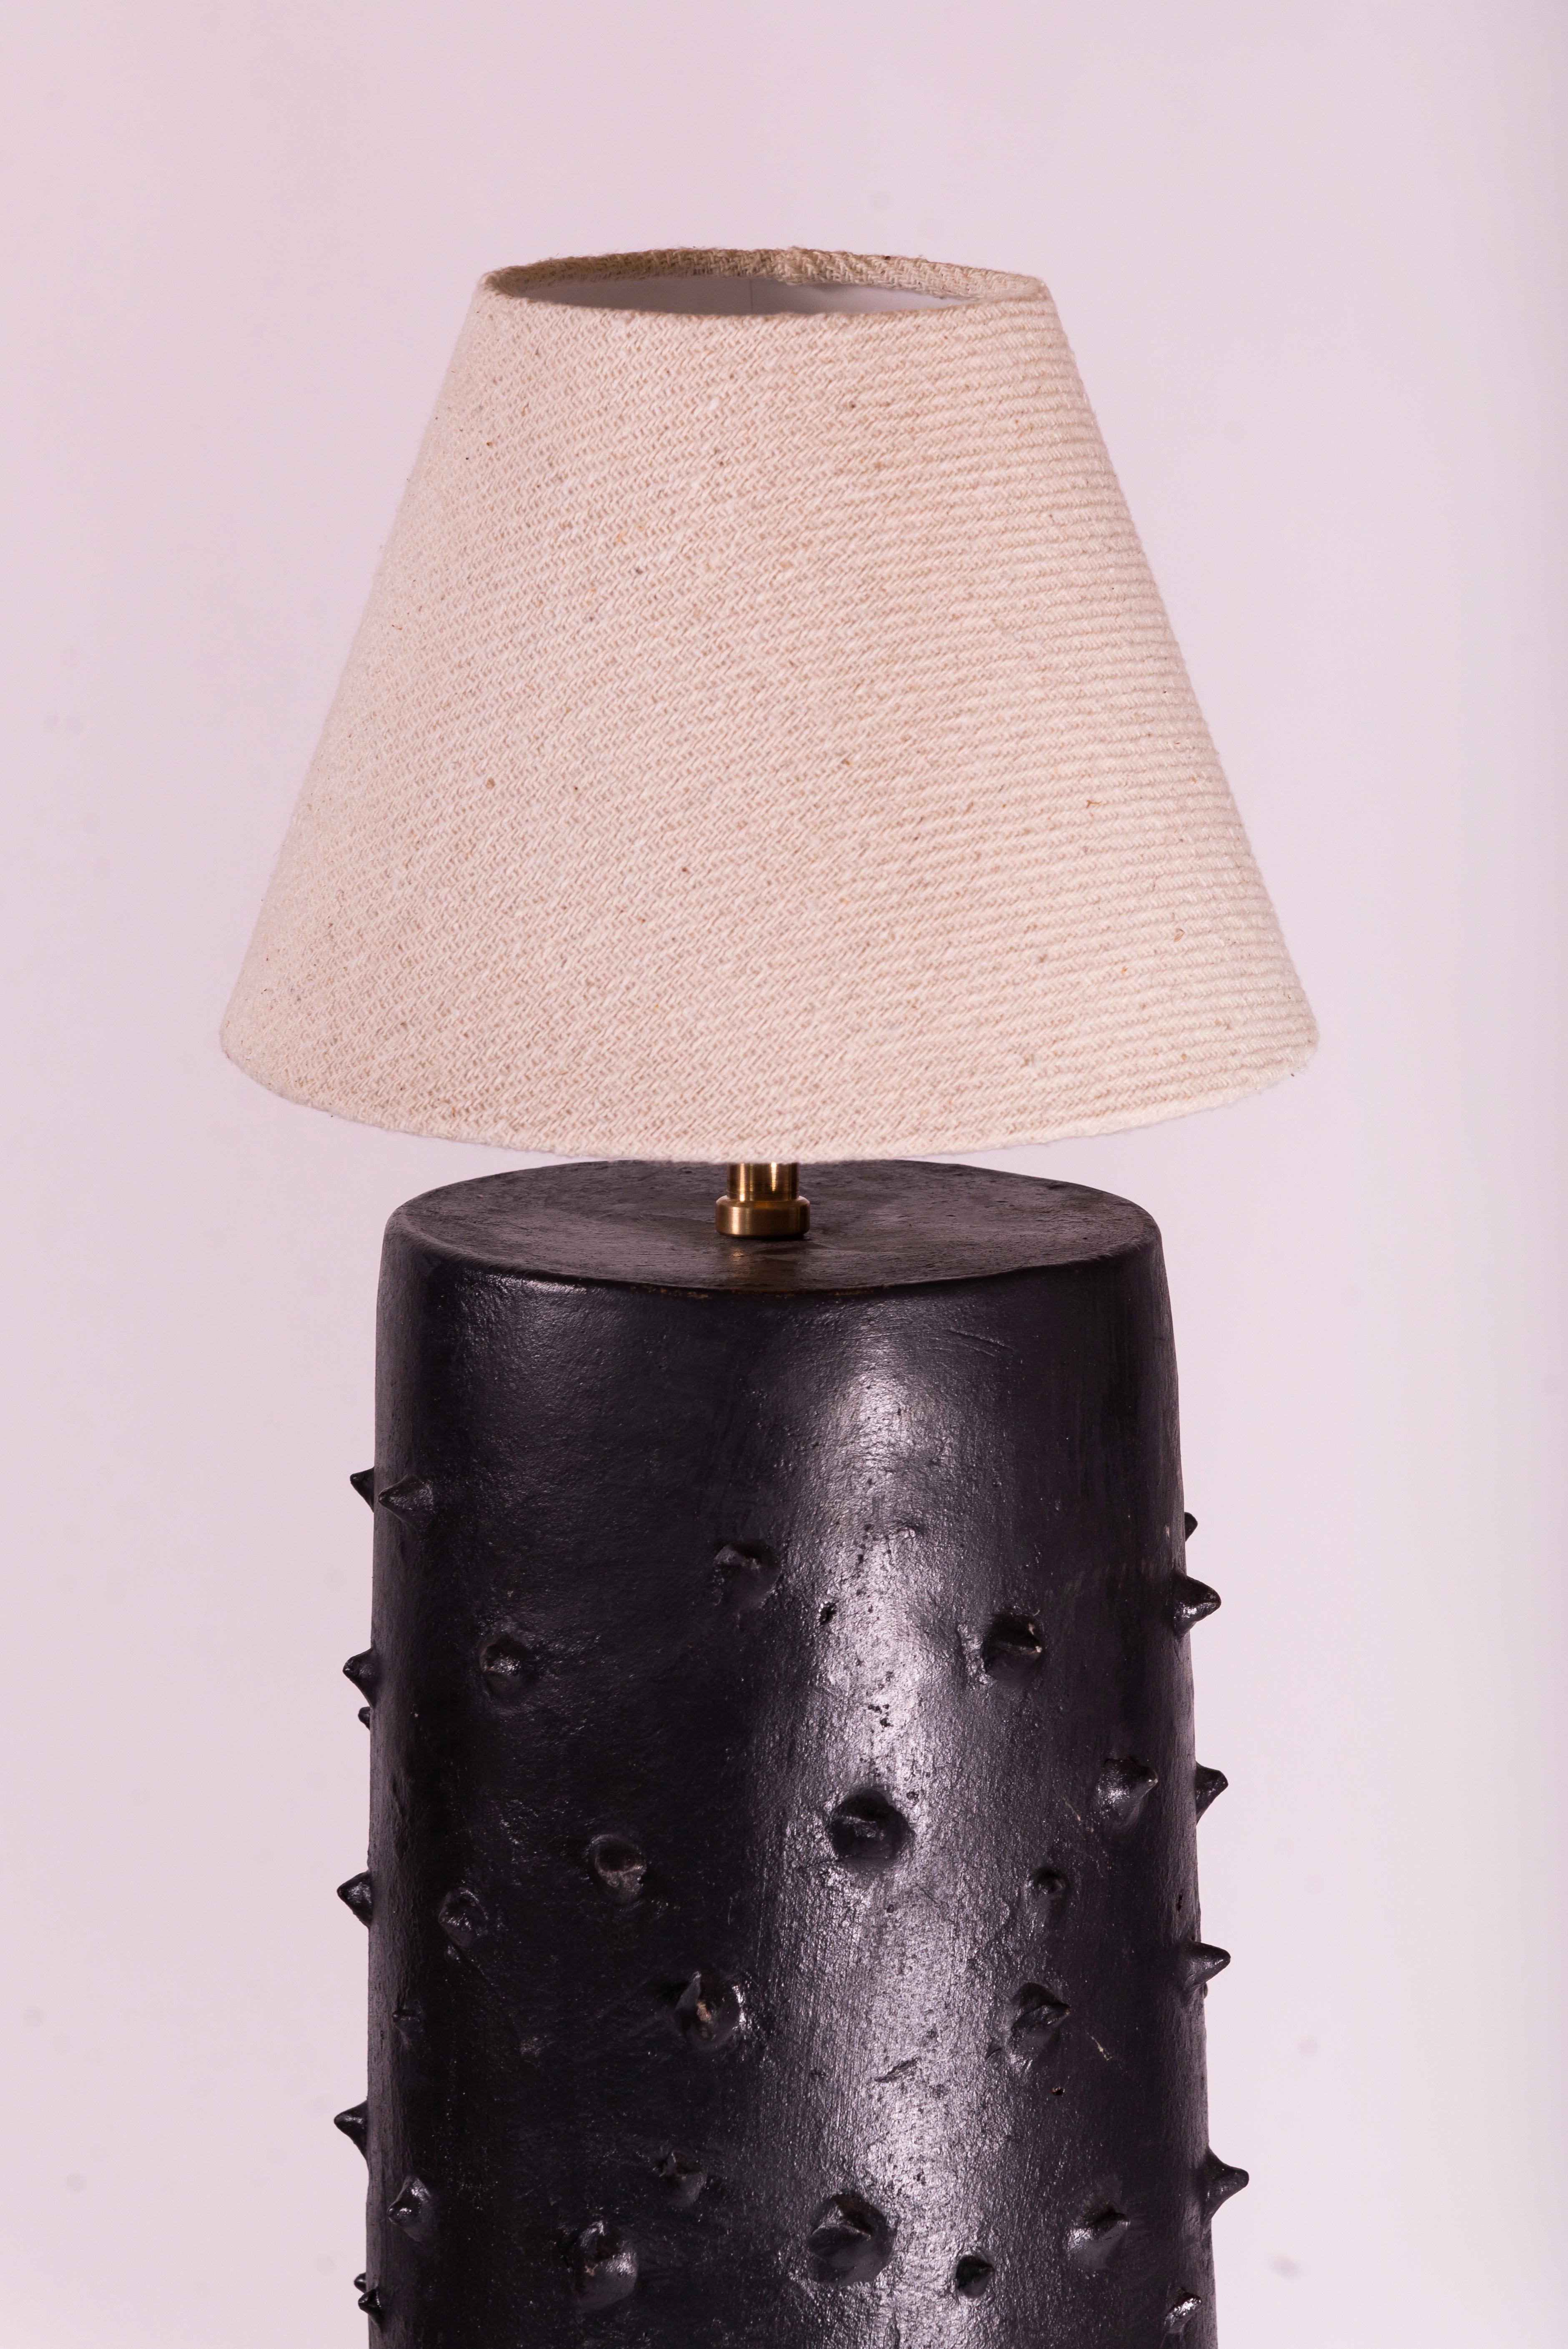 The Ceiba lamp is a clay lamp handmade by artisans from Yucatan and designed by Chuch Estudio. The large scale clay as an ancestral tradition allowed the production of these contemporary pieces. Oxides and natural minerals gave color to the piece. A